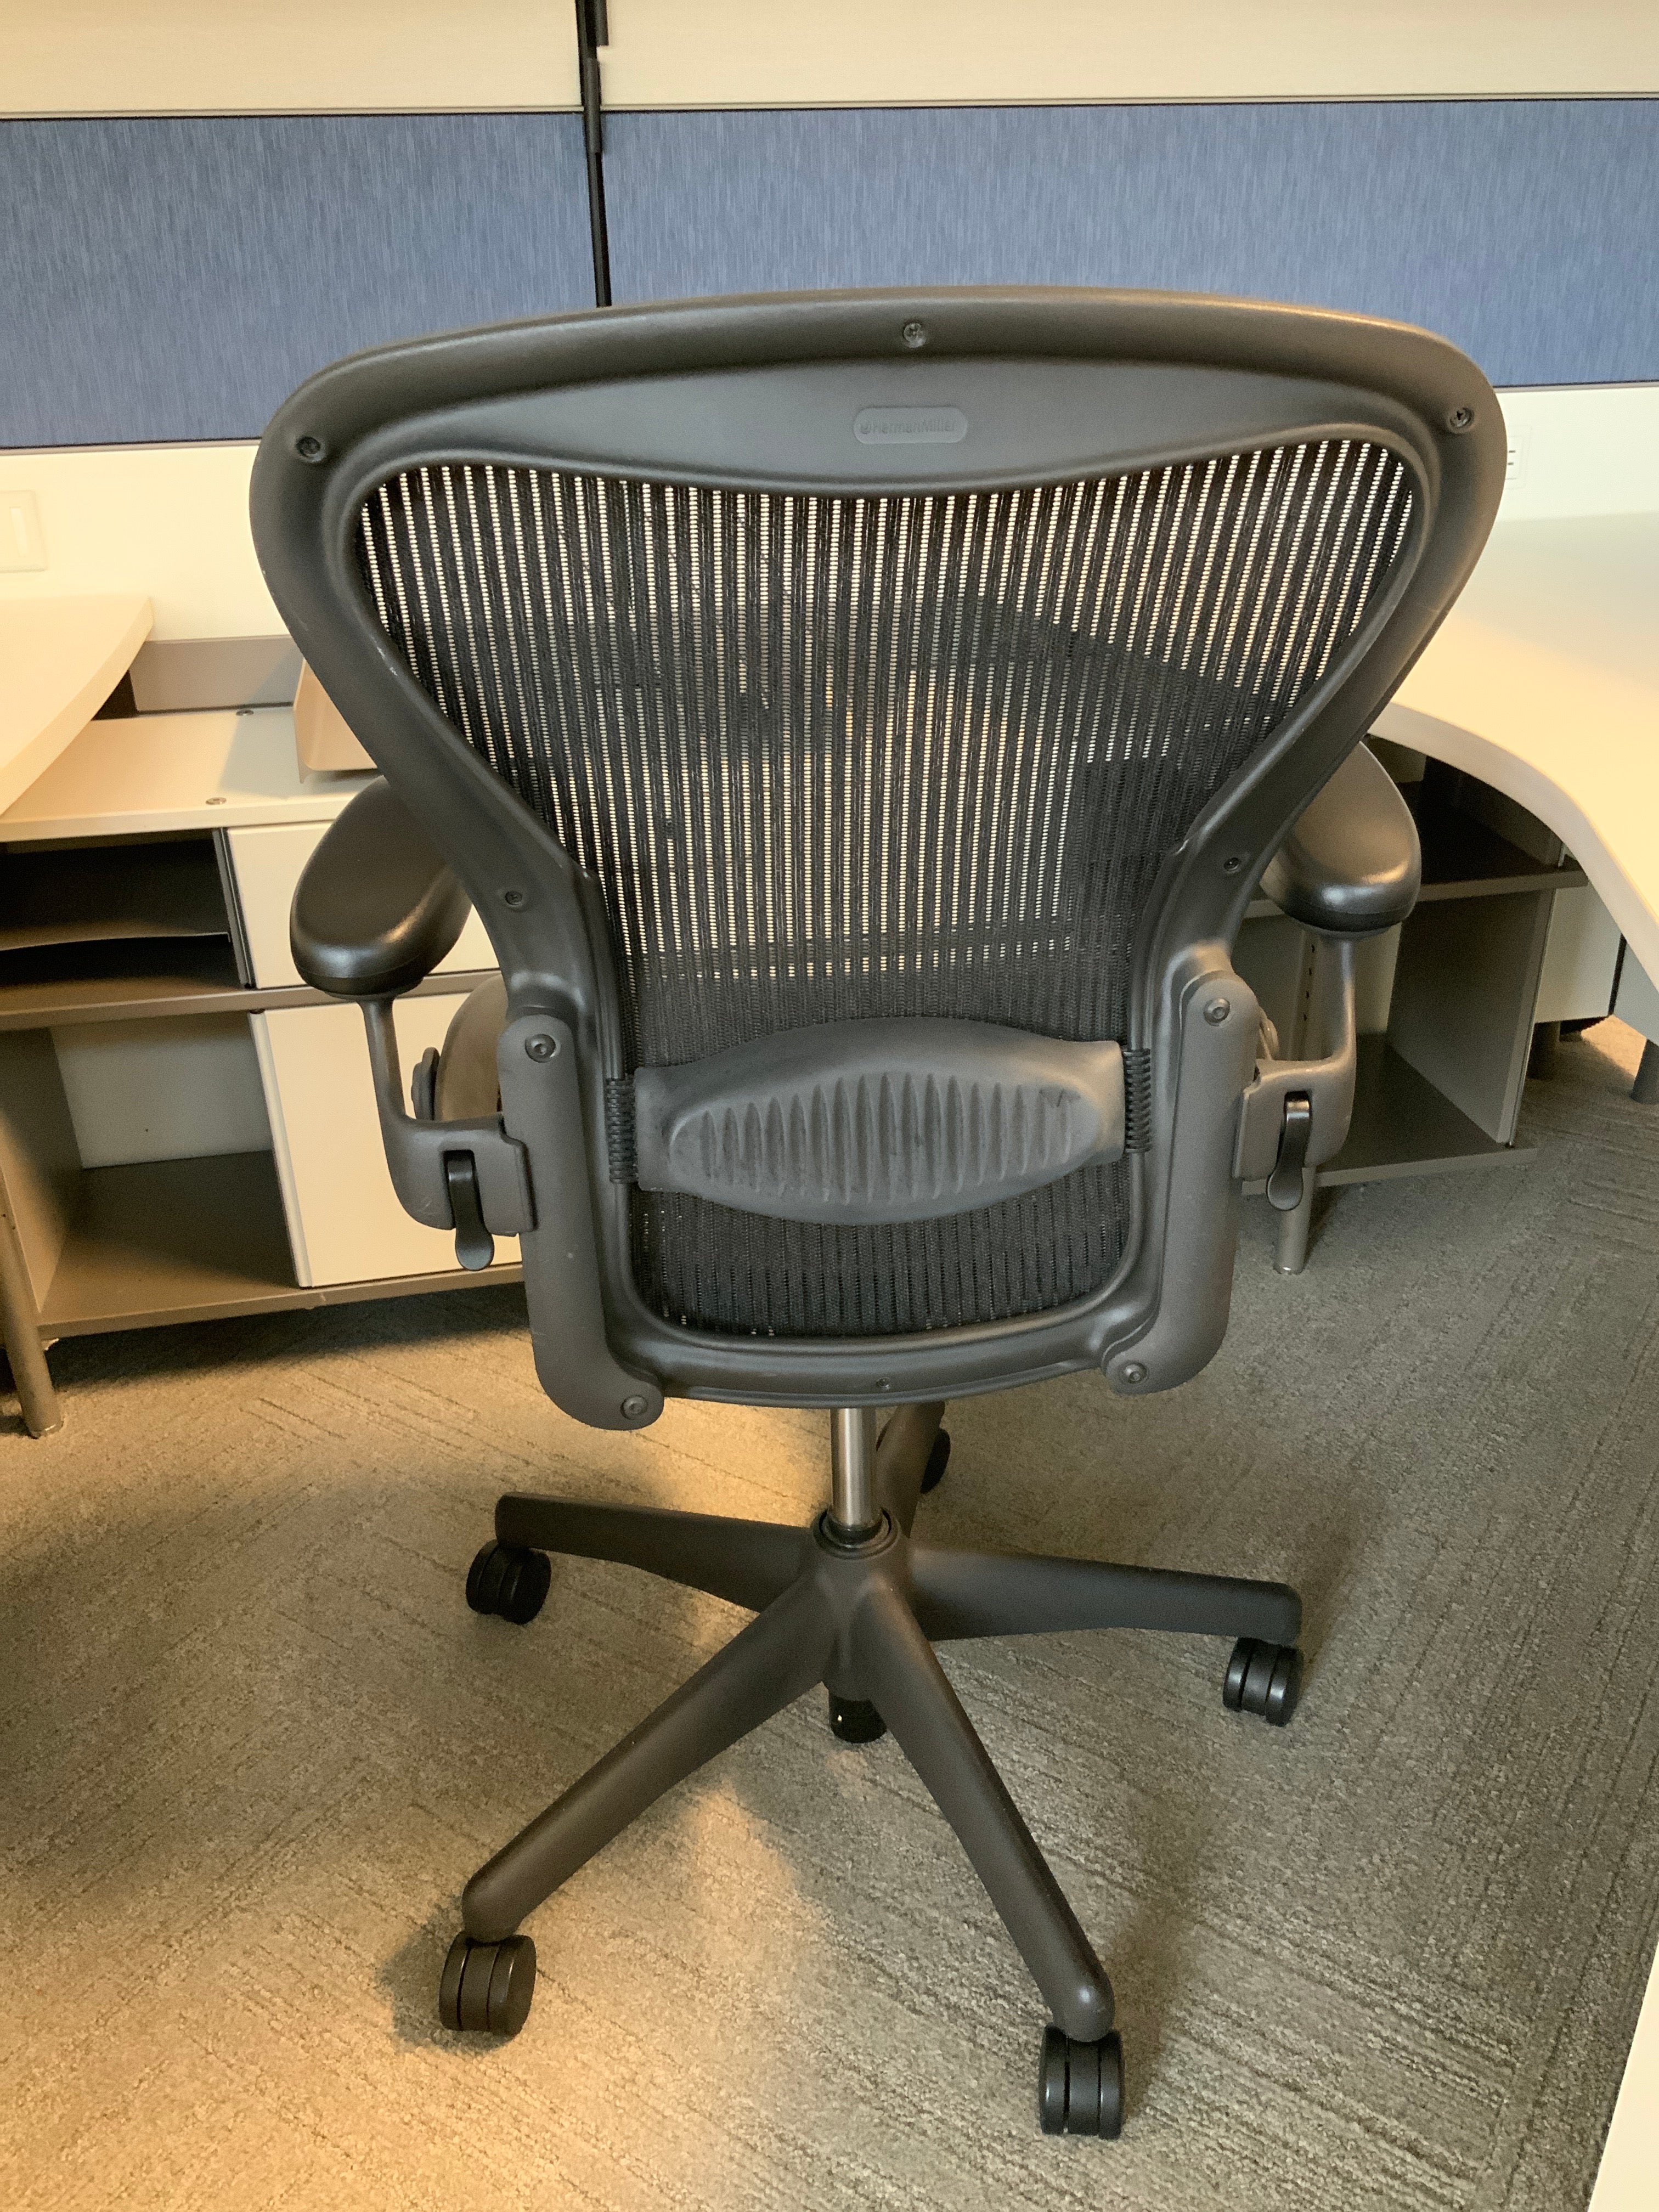 Herman Miller Carbon Aeron Task Chair Size B - Preowned - FOB Vernon Hills, IL (Min Purchase Qty = 20)